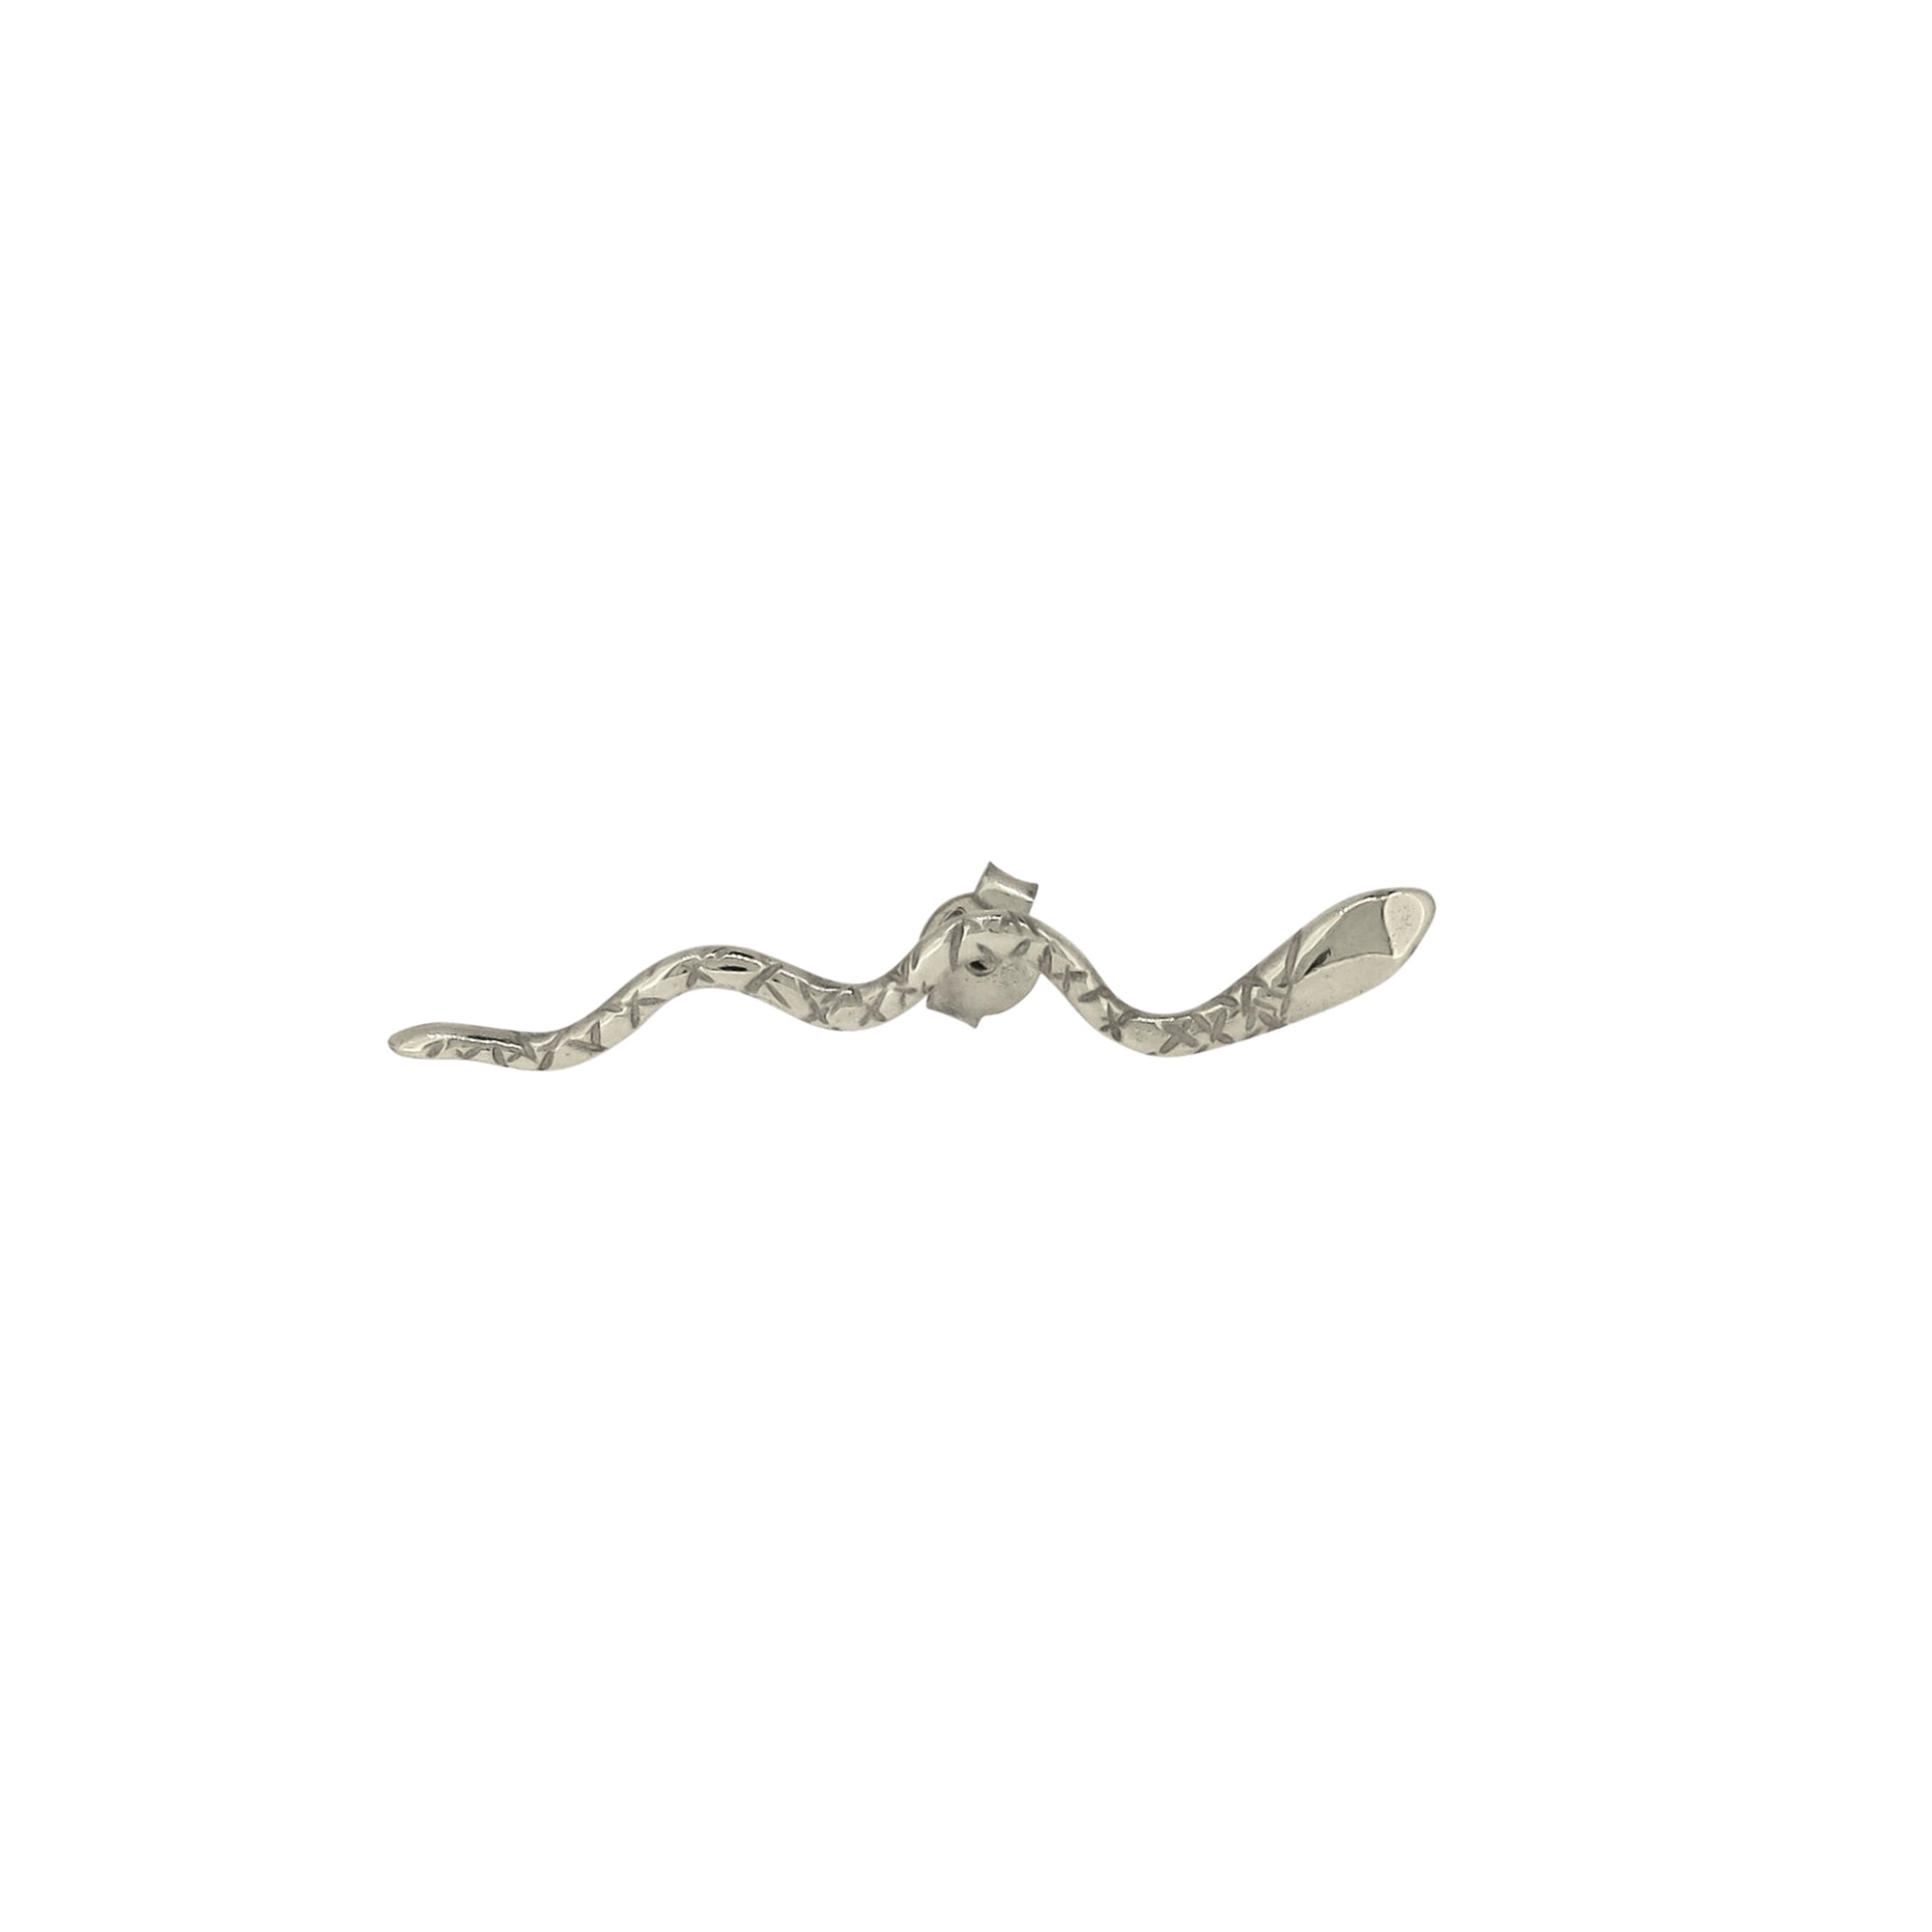 The Serpent Stud Earring Silver - Serpent & the Swan